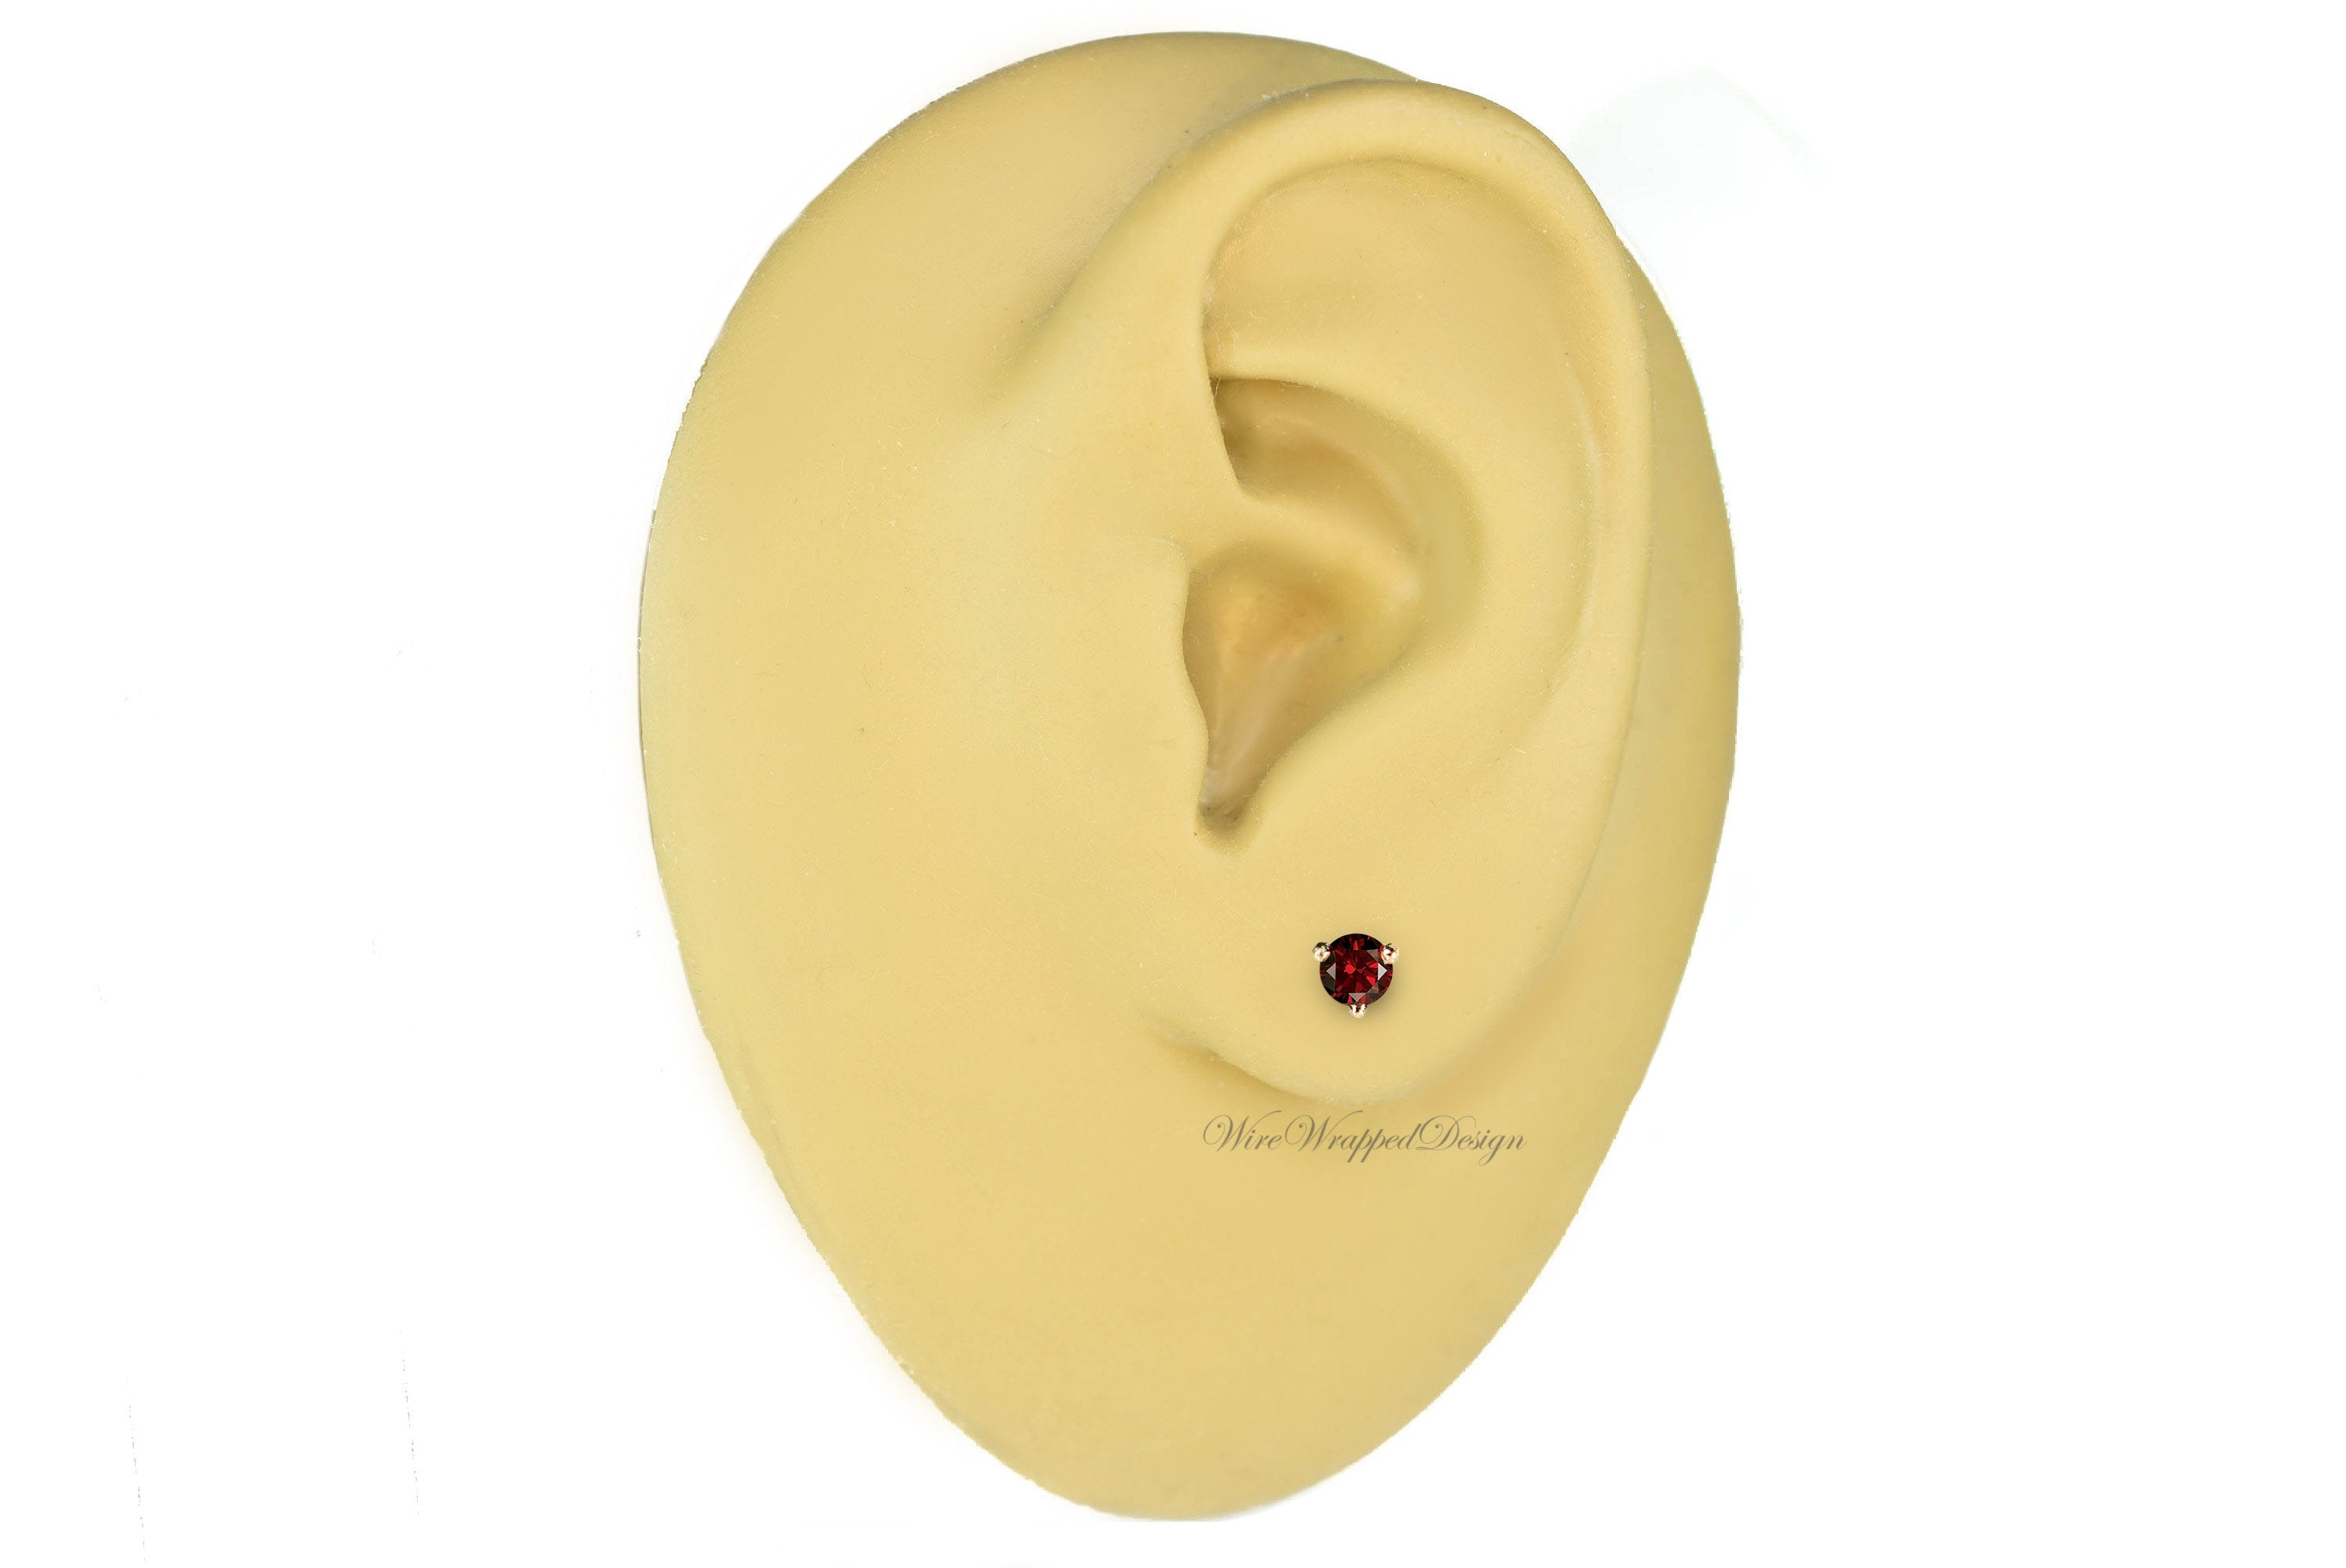 PAIR Genuine RED DIAMOND Earrings Studs 3mm 0.2tcw Martini 14k Solid Gold (Yellow, Rose or White), Platinum, Silver Cartilage Helix Tragus